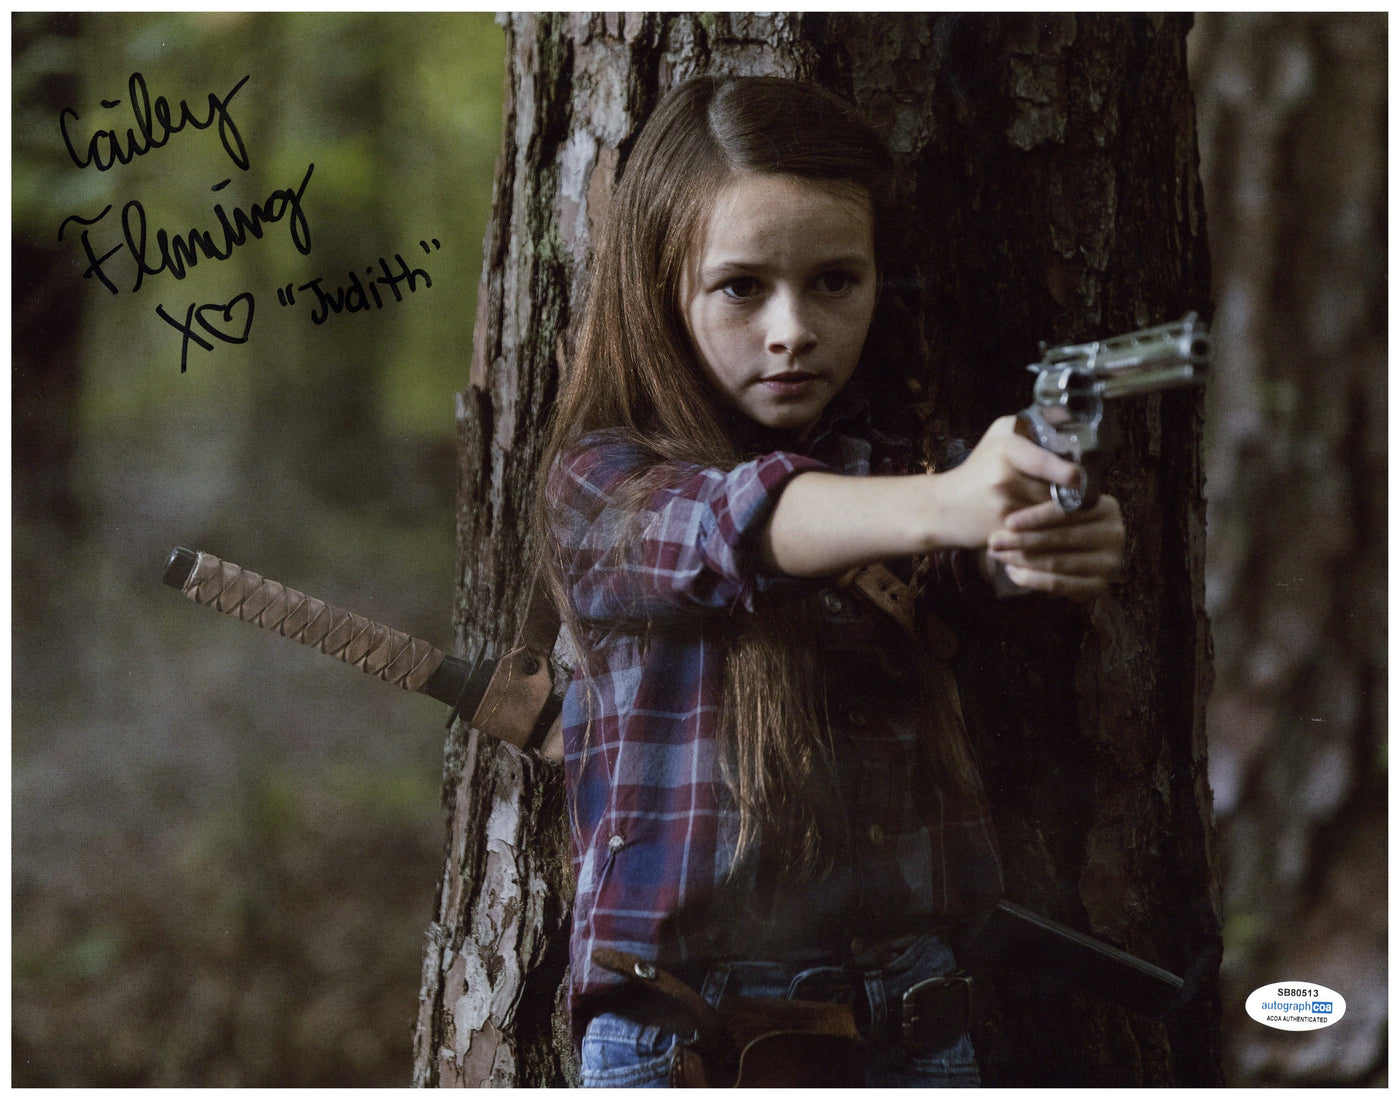 Cailey Fleming Signed 11x14 Photo The Walking Dead Autographed ACOA